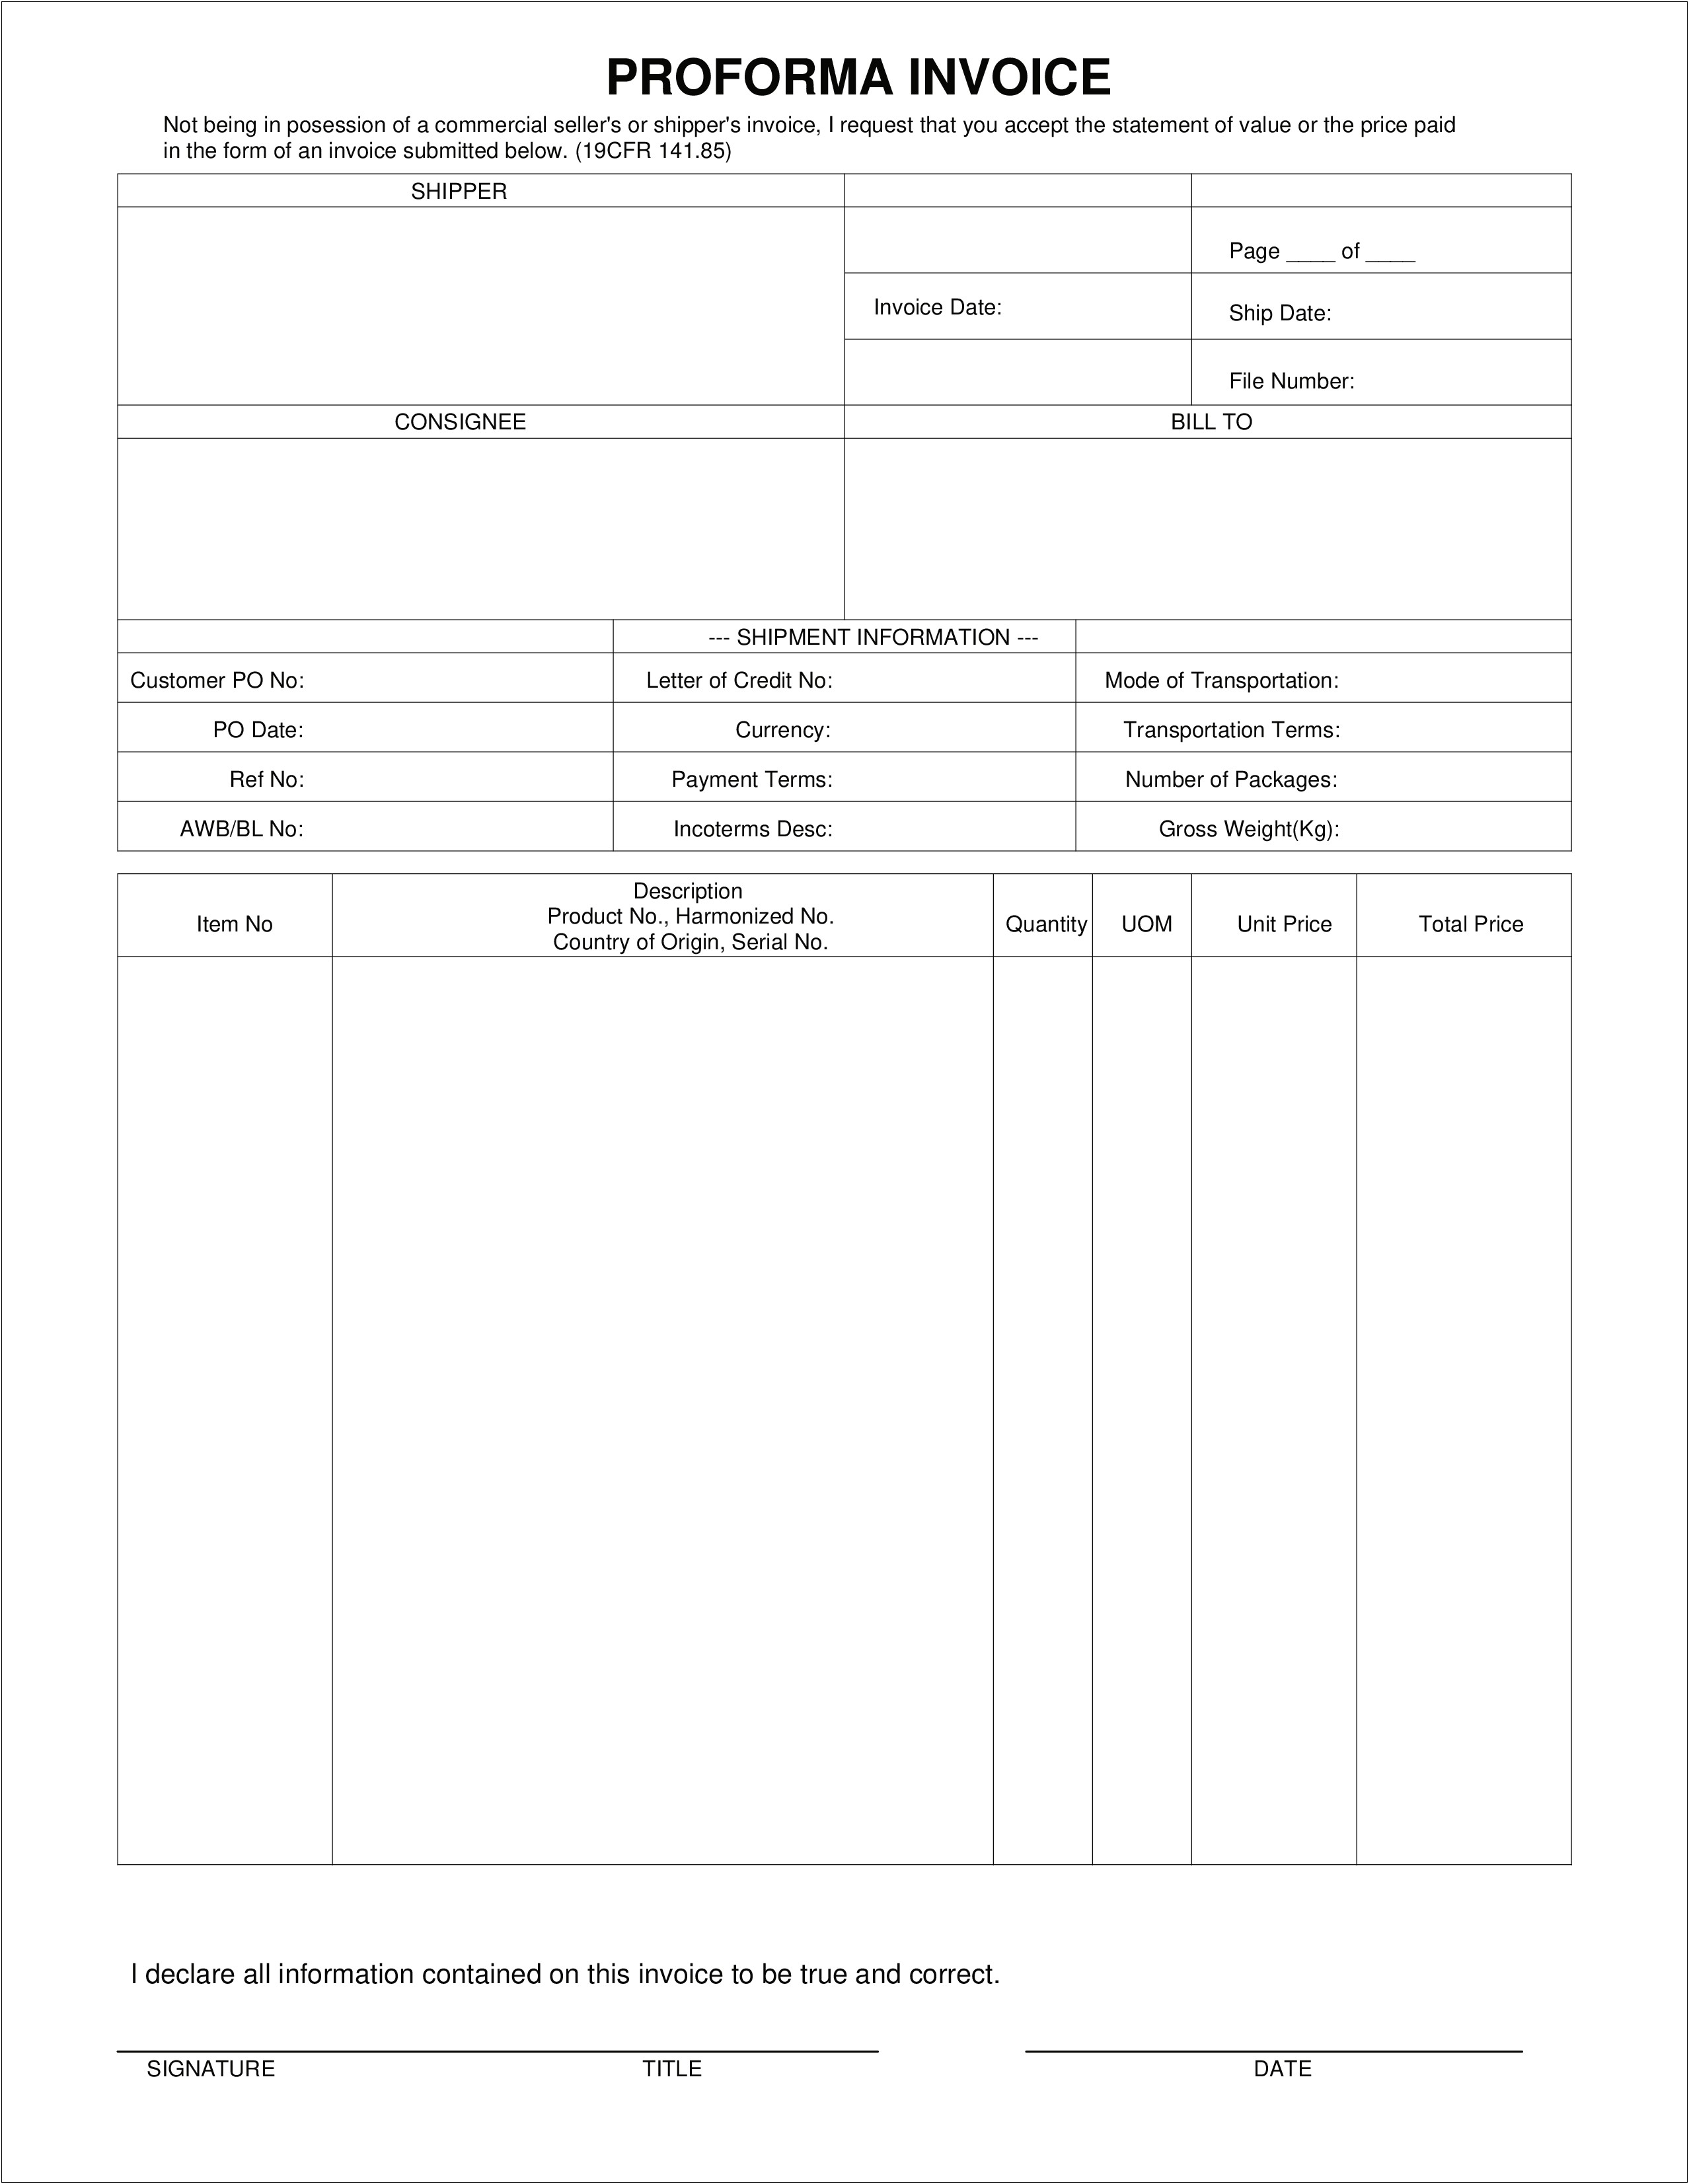 Proforma Invoice Template Excel Free Download